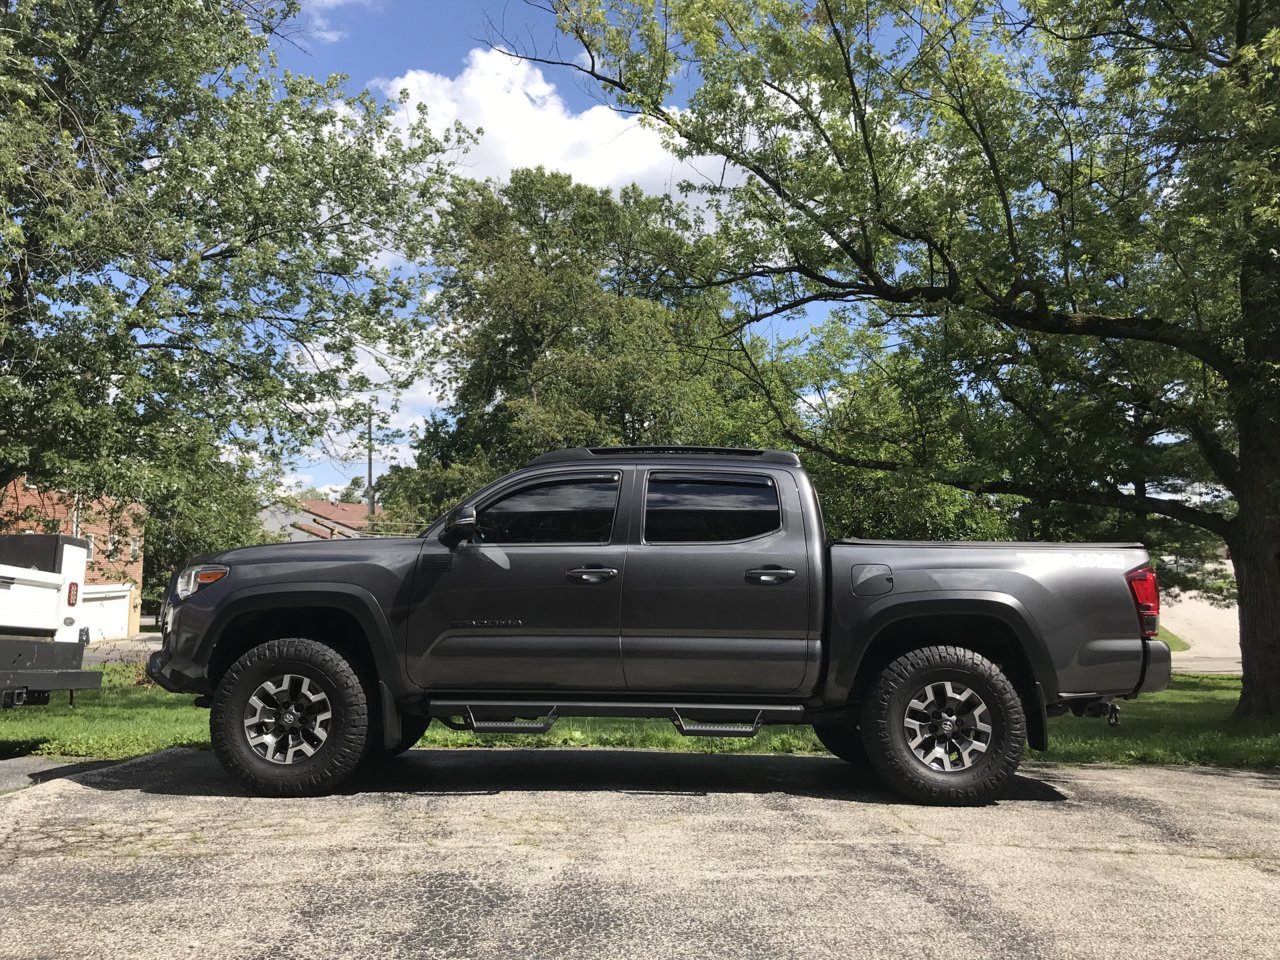 DIY: Clear Coating a TRD or any other grill